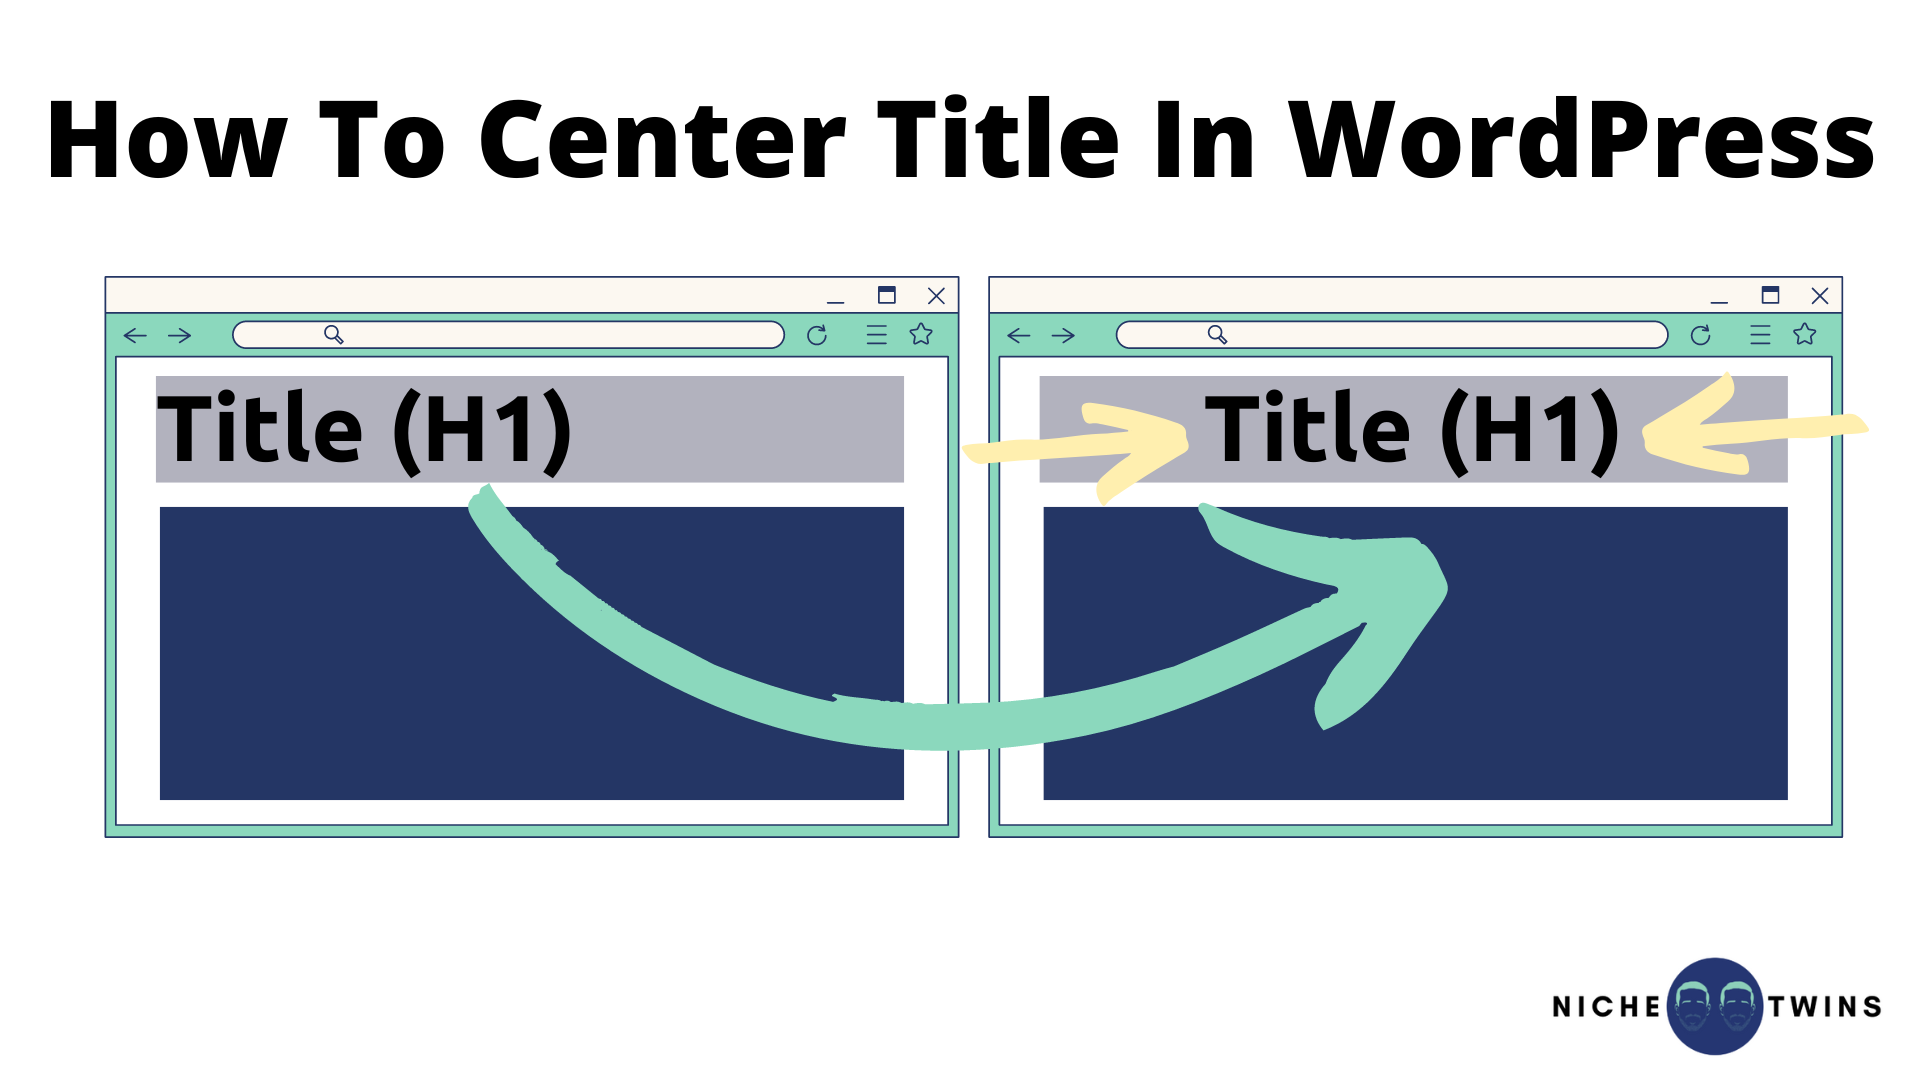 How to center title in WordPress